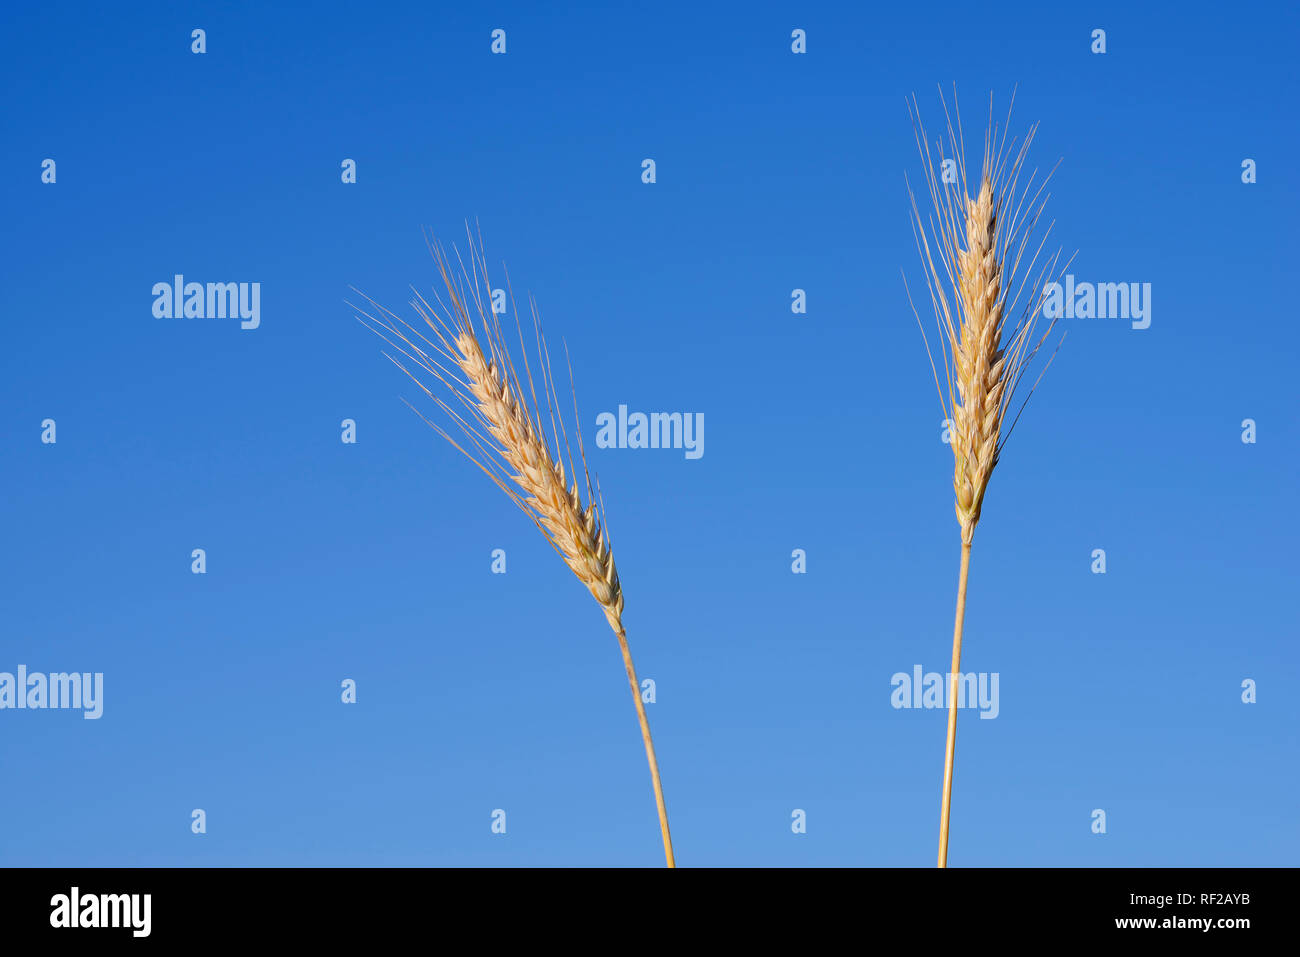 Two ears of rye against clear blue sky in summer, Bavaria, Germany Stock Photo